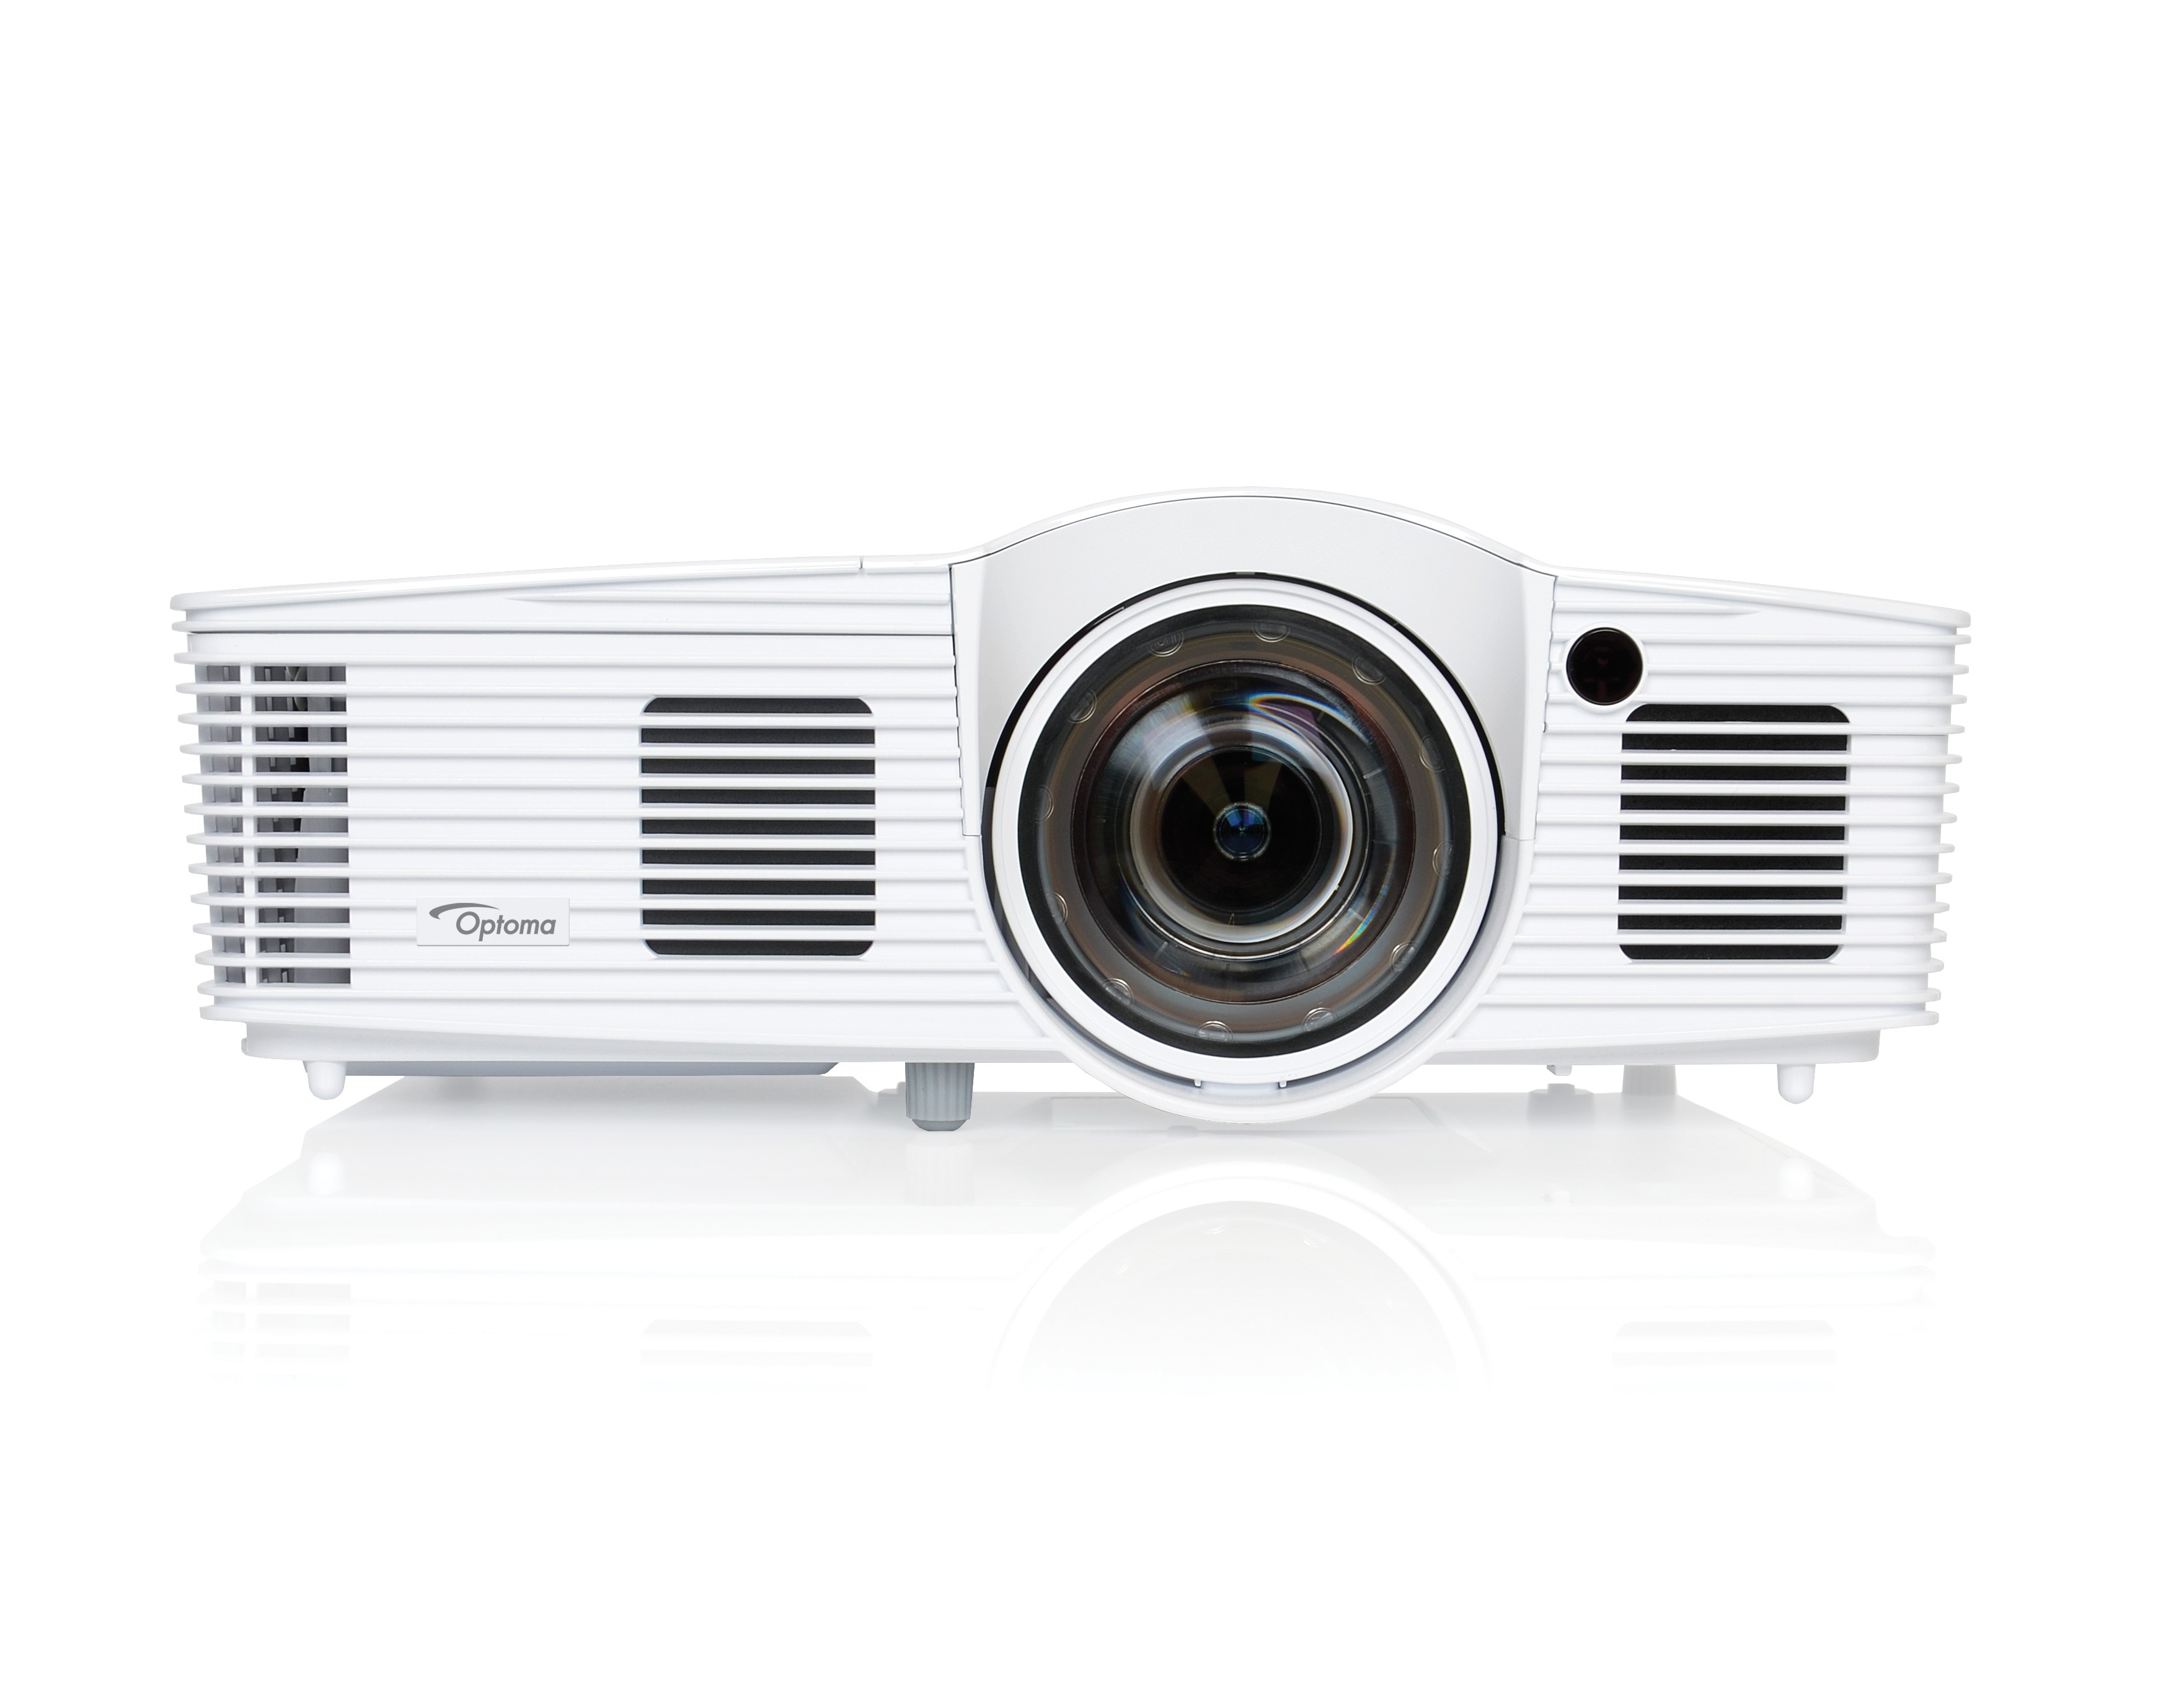 Optoma EH200ST DLP 3000 Lumens Projector Review